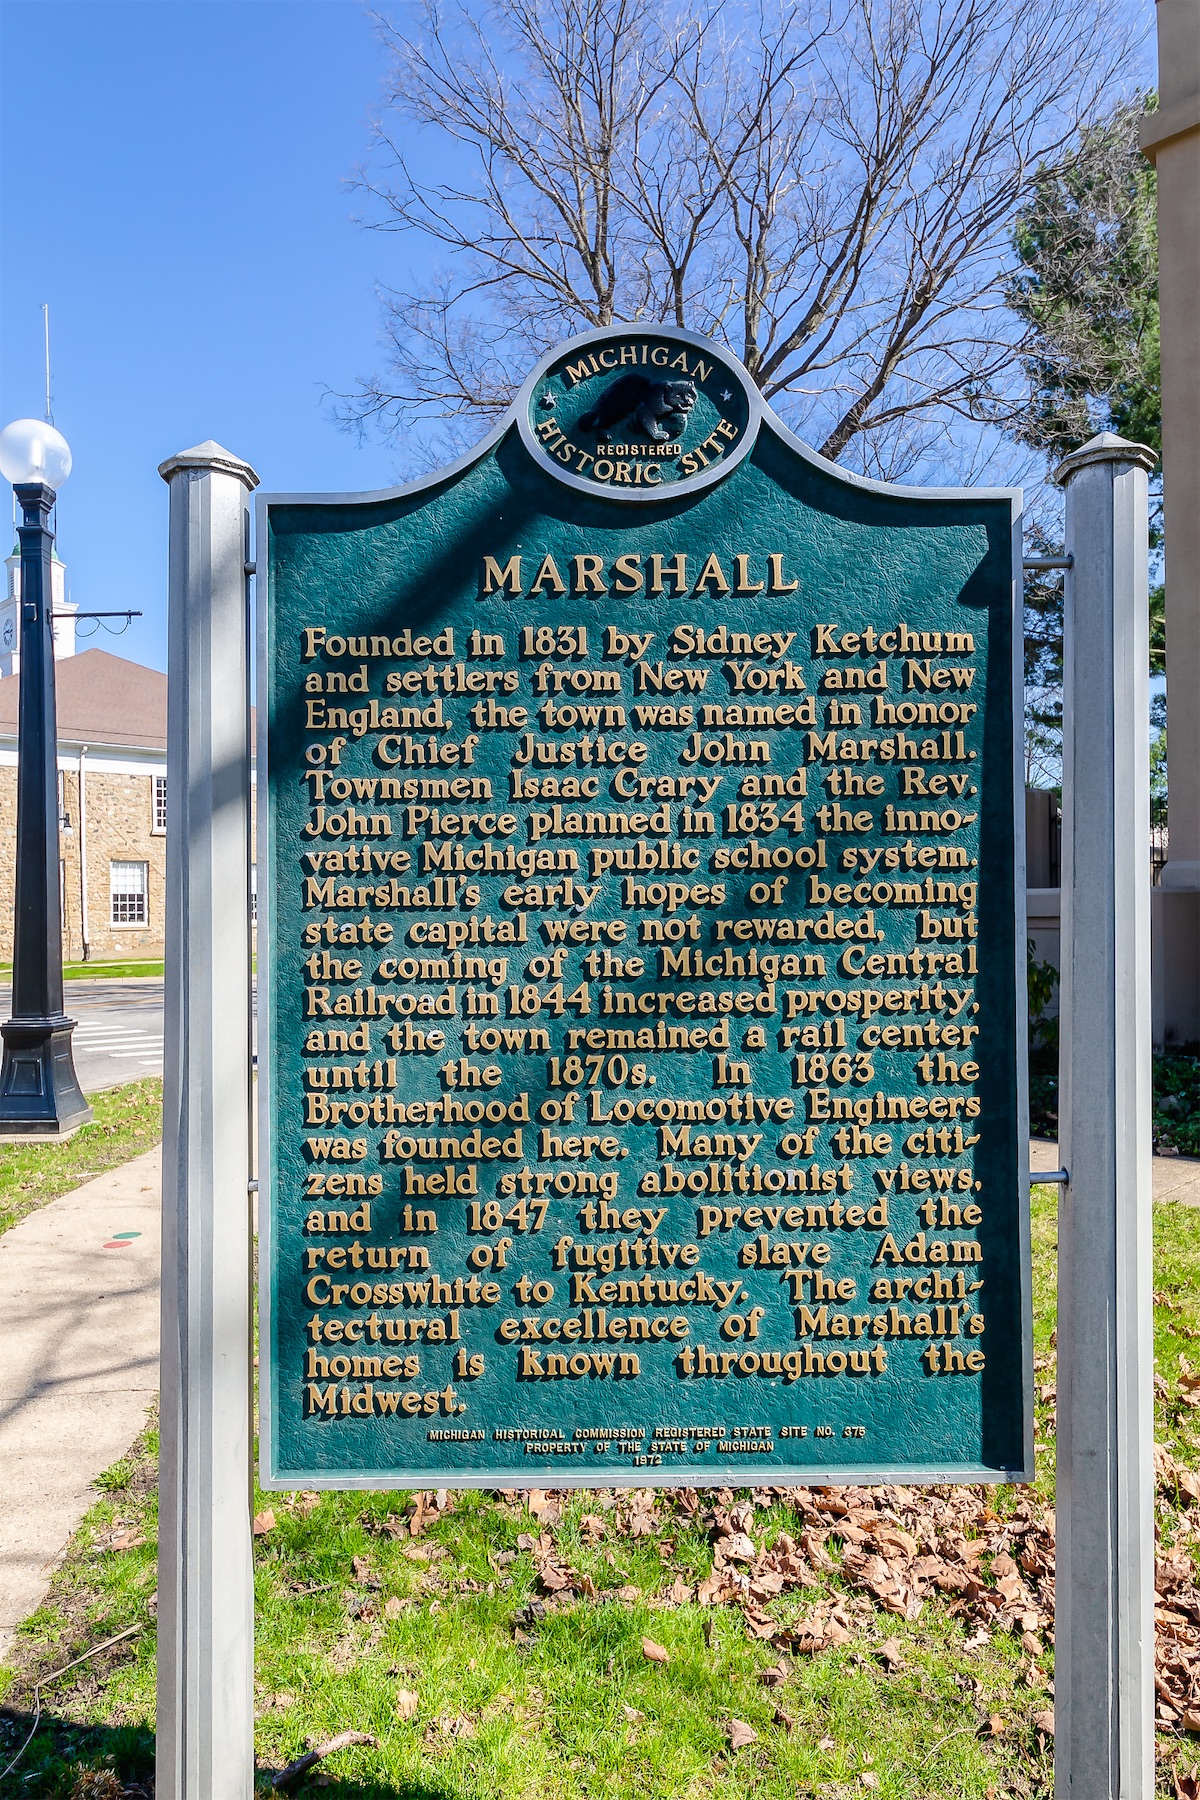  A historic site plaque for Marshall, Michigan